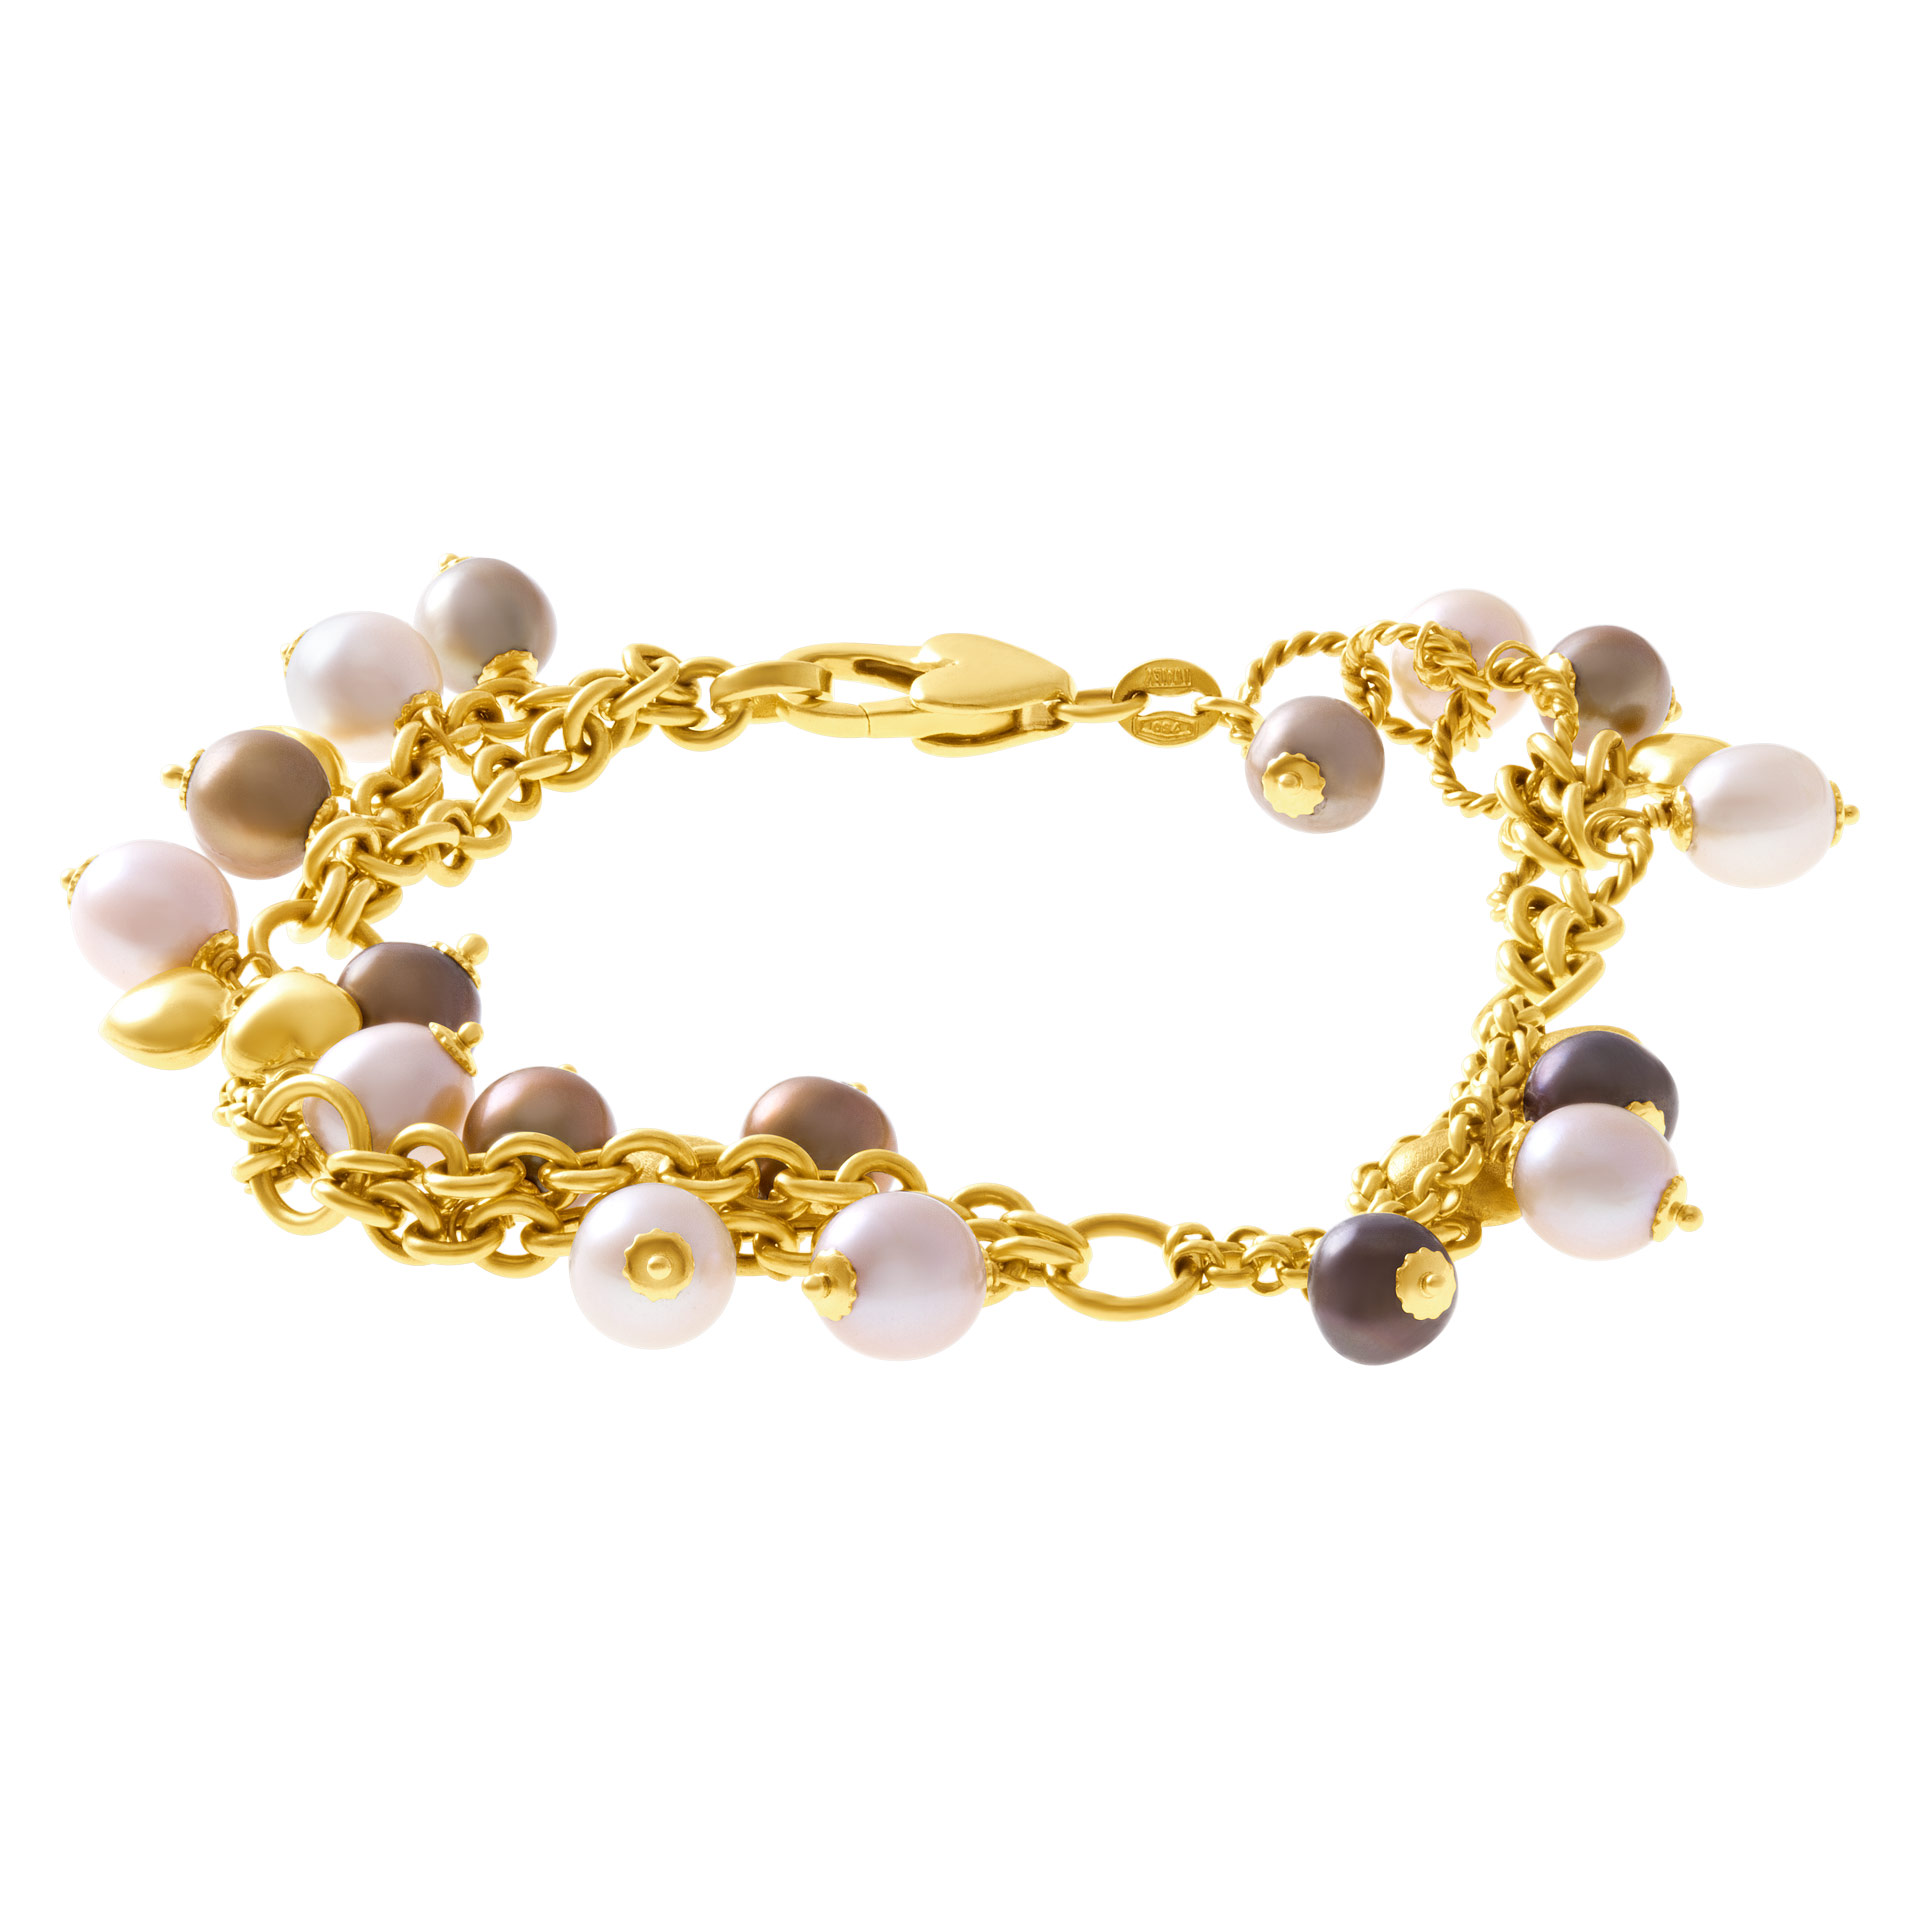 Dangling golden, grey, white fresh water pearls & gold heart charms bracelet in 18k yellow gold